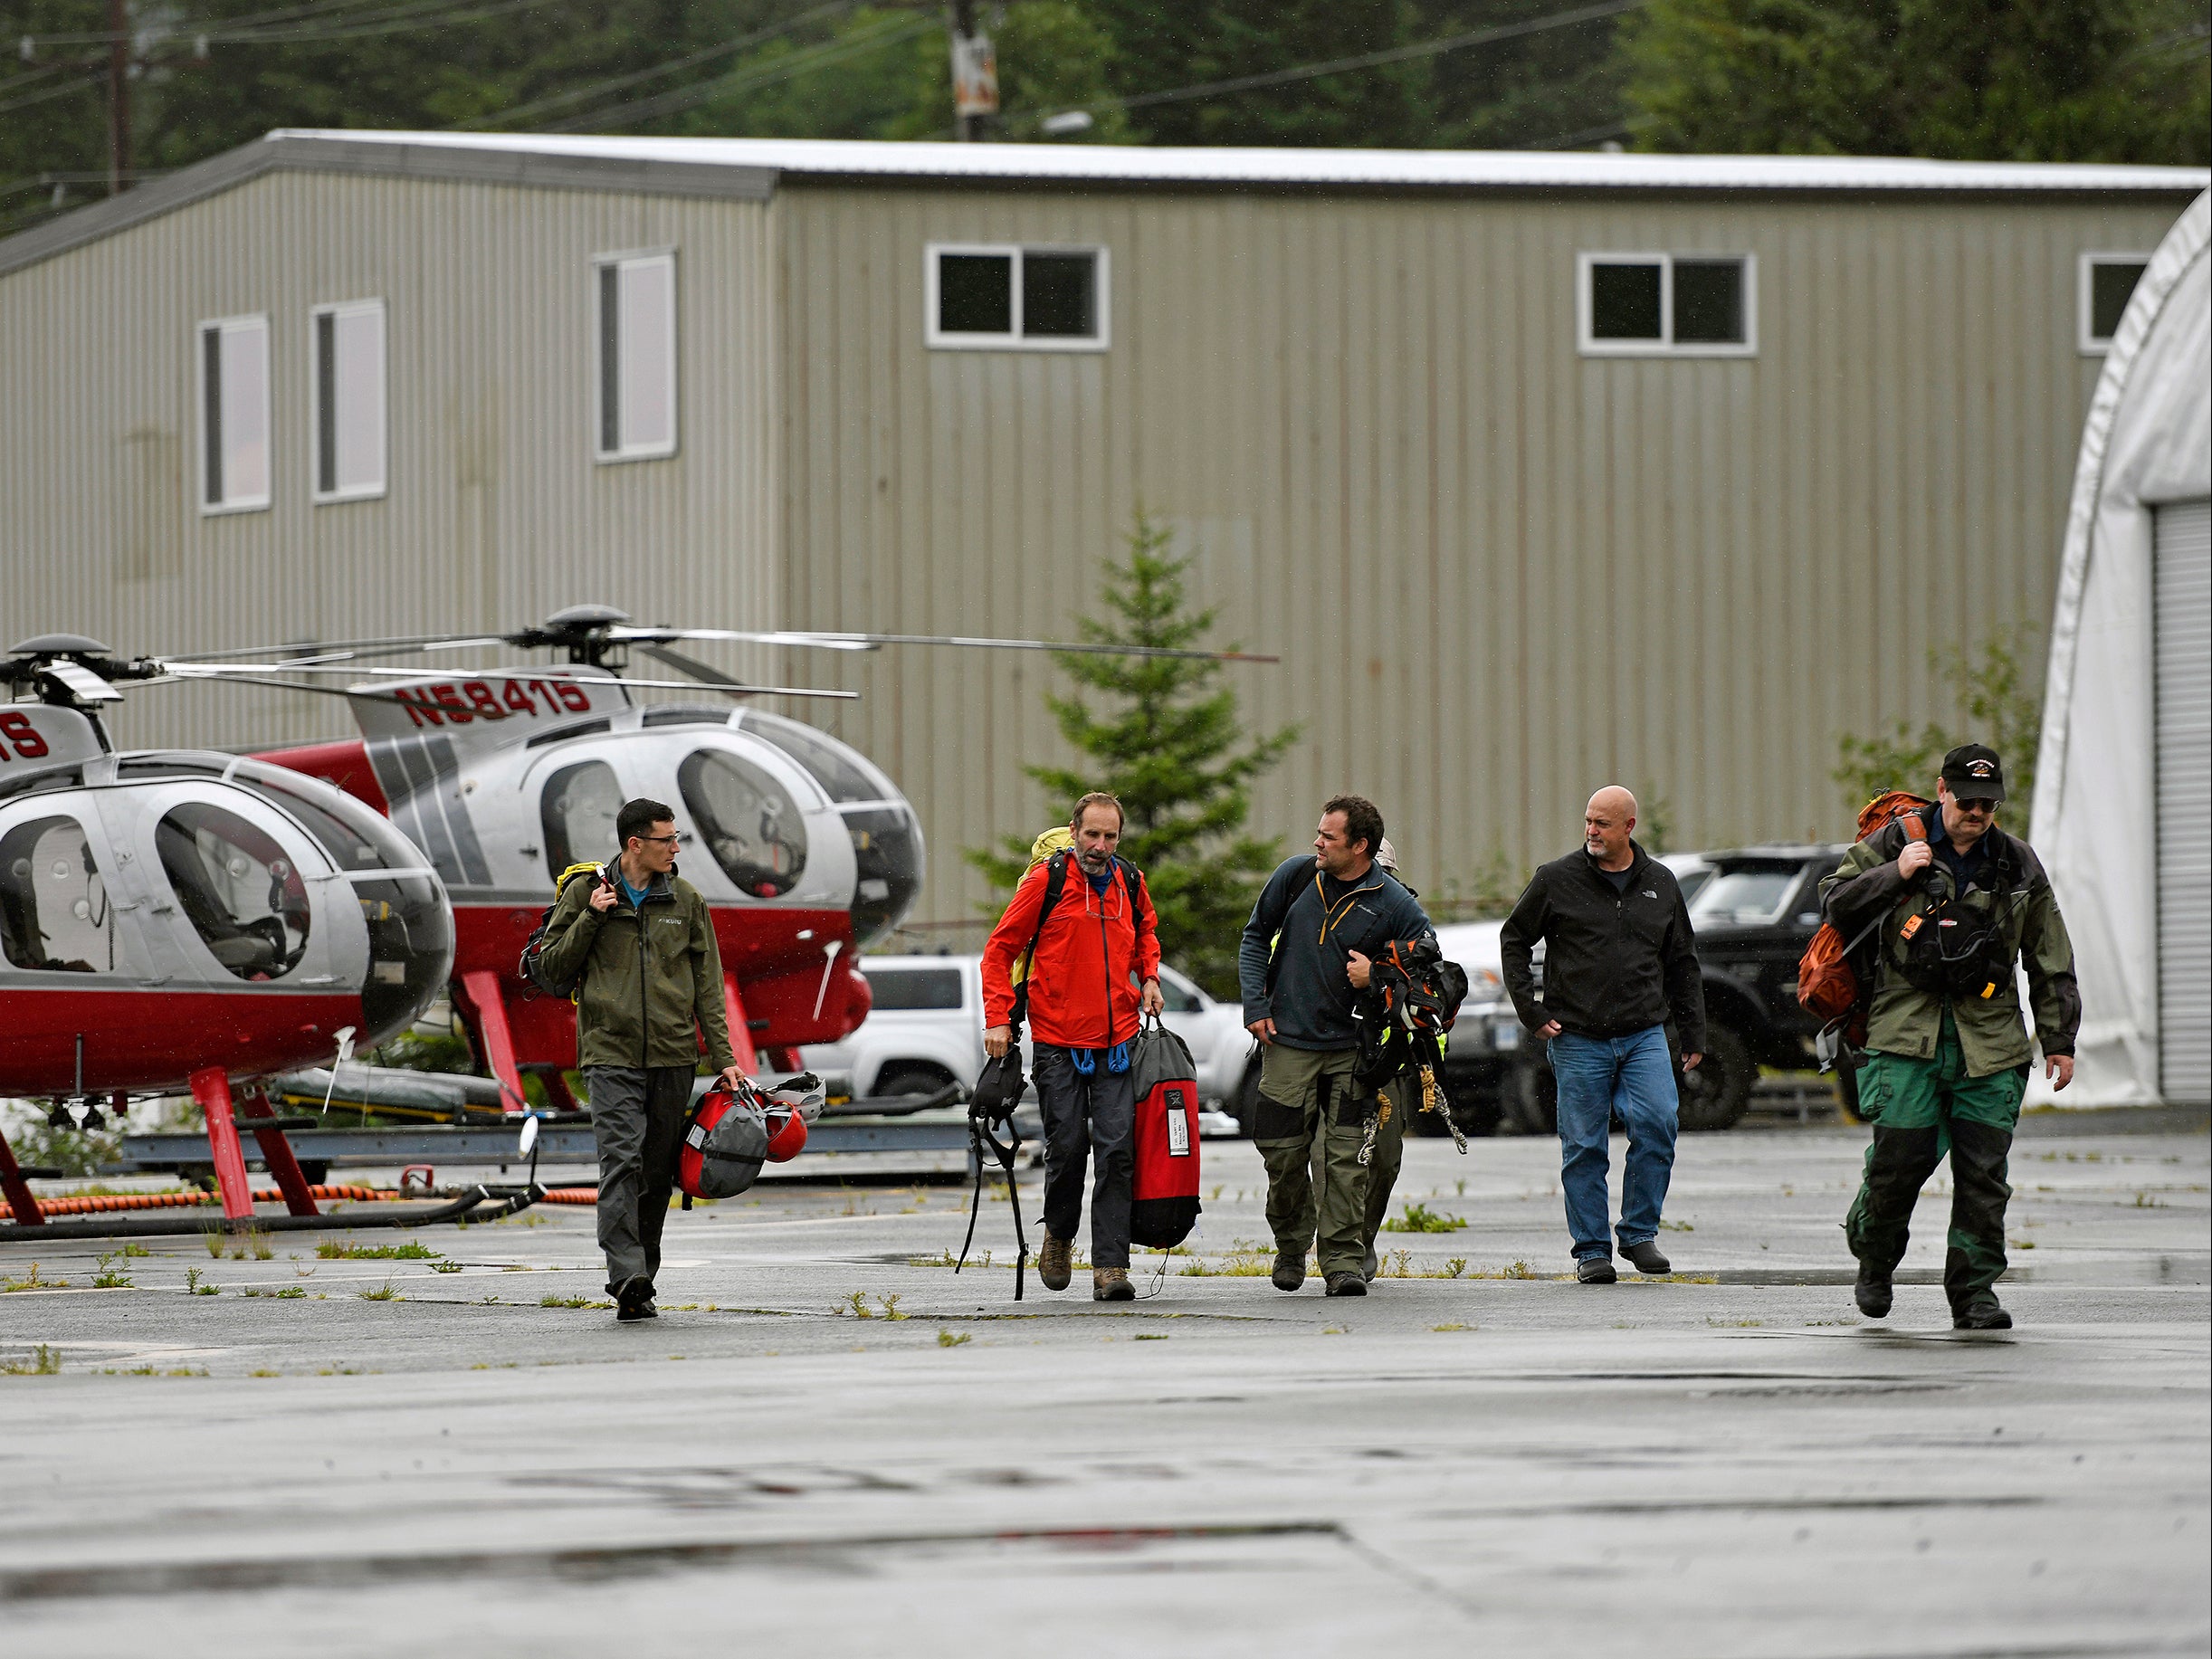 Ketchikan Volunteer Rescue Squad personnel land and disembark from a Hughes 369D helicopter on Thursday, 5 August 2021